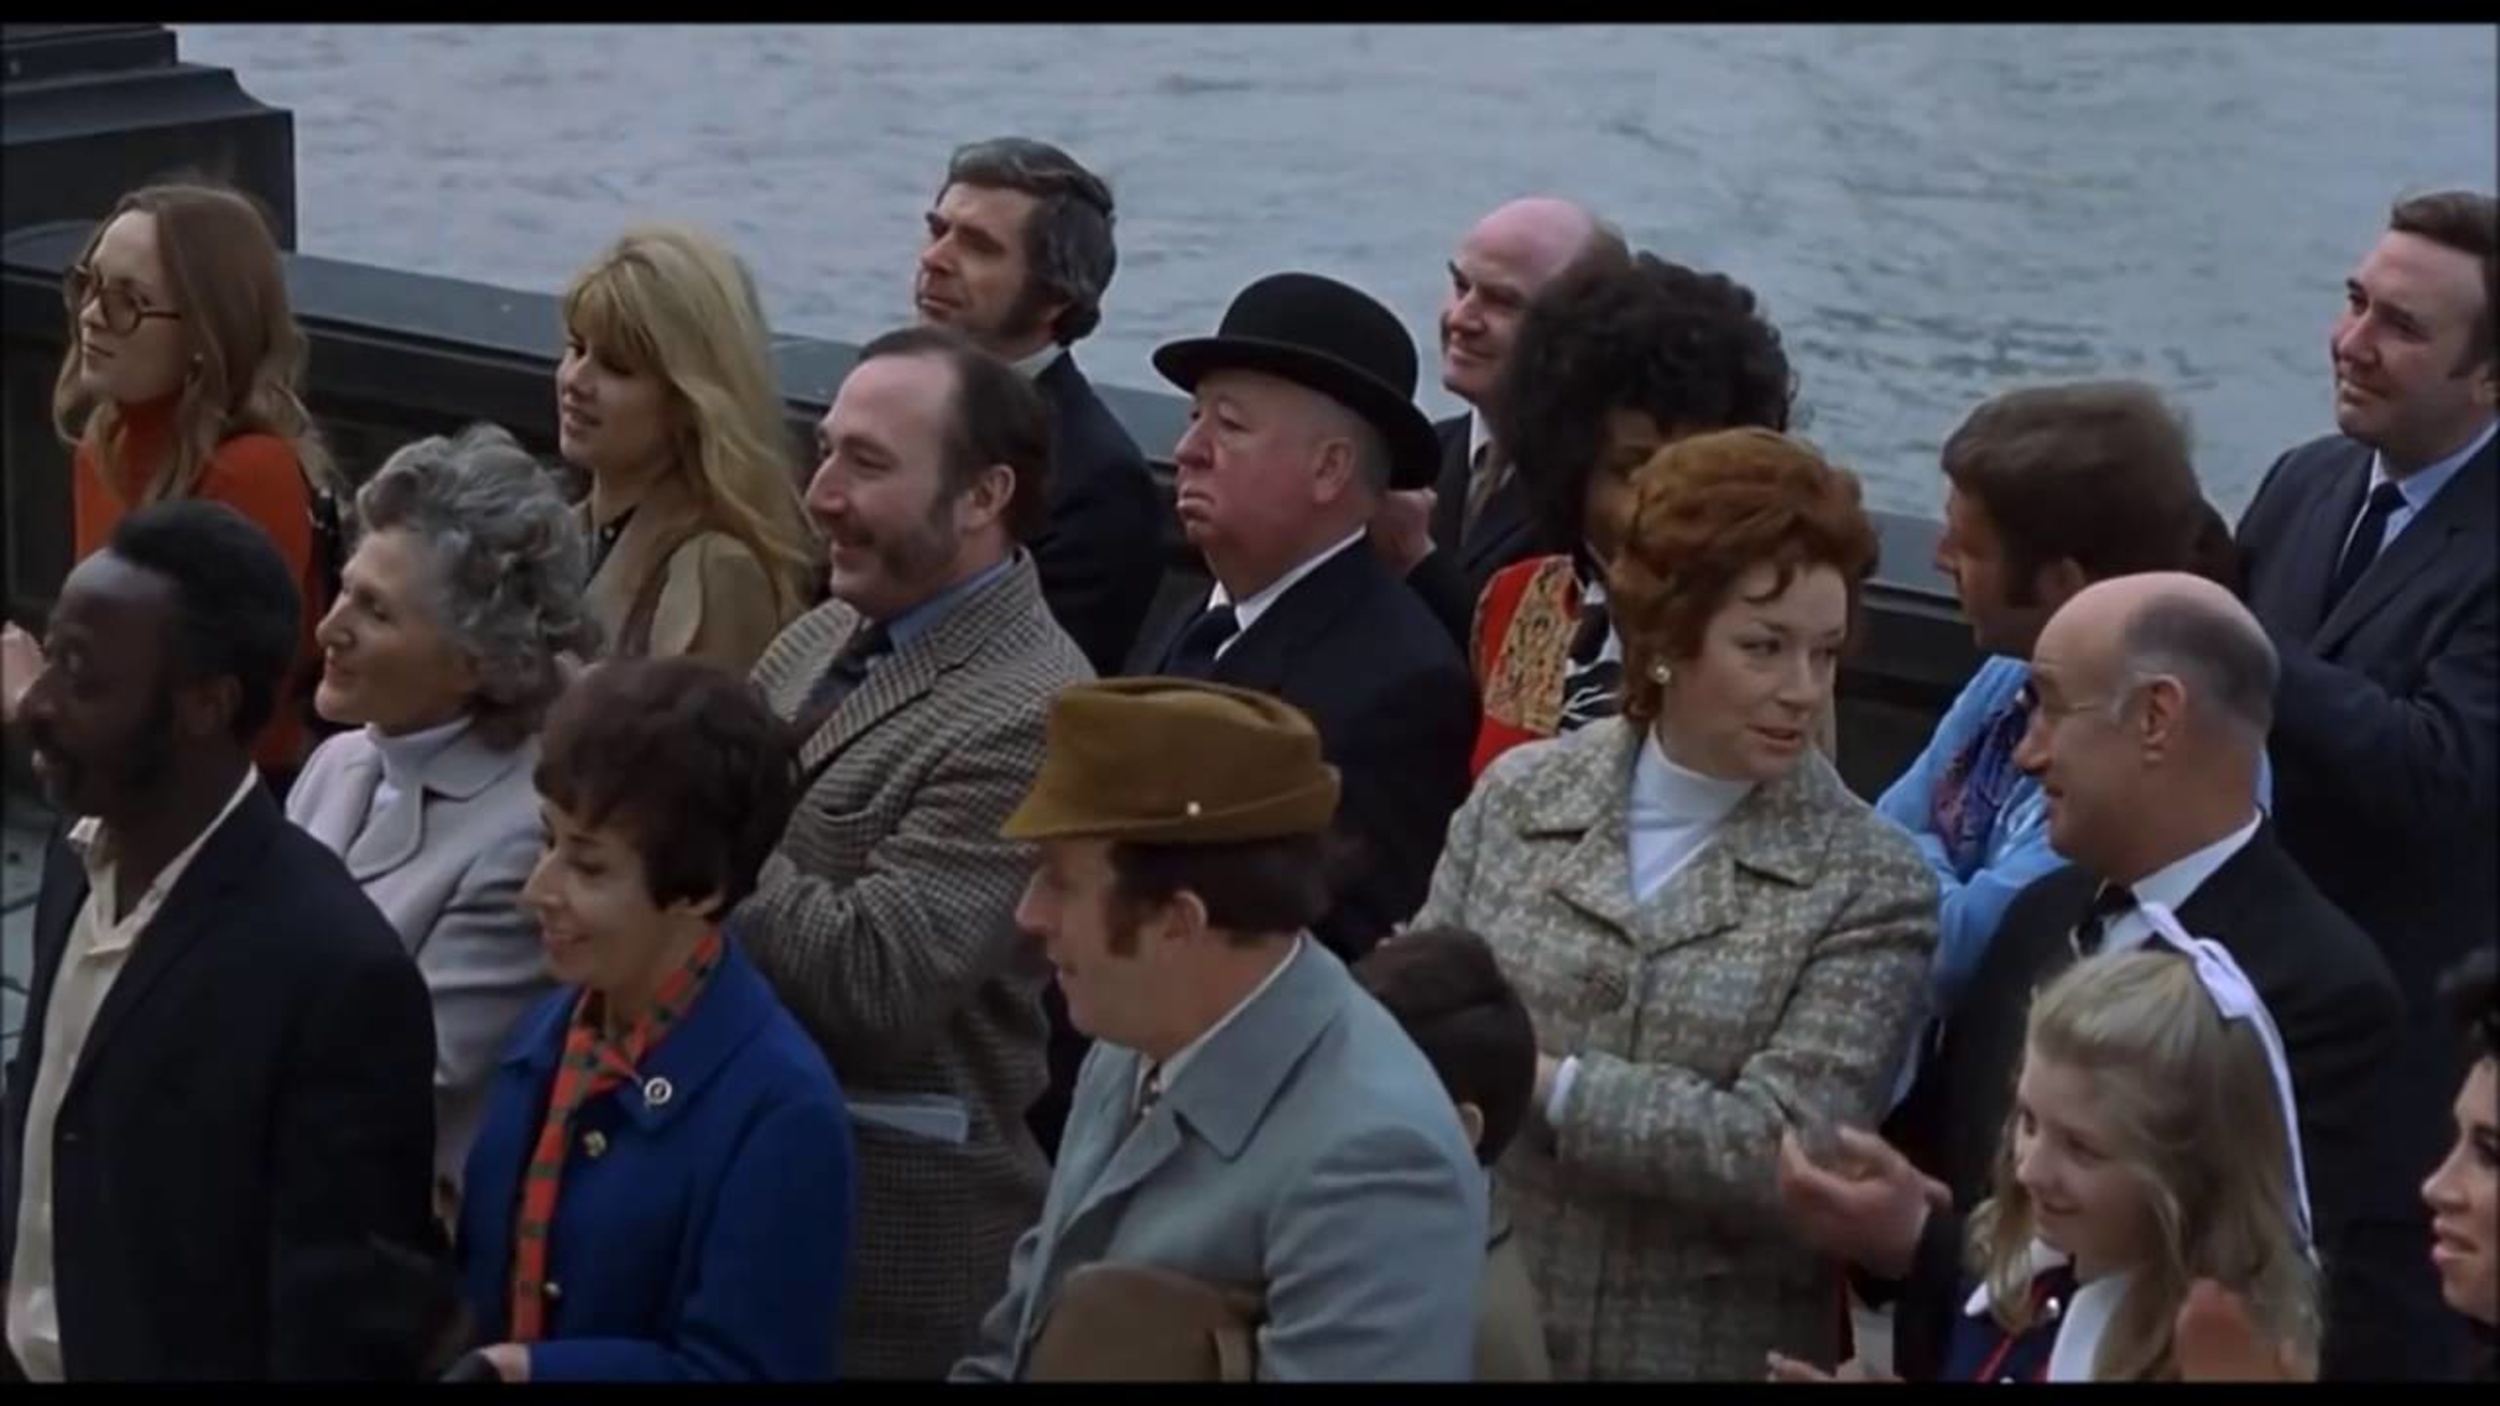 <p>By the ‘70s, Hitchcock’s best days were behind him. You can see him in “Frenzy,” a weird little film, as a man in a crowd wearing a black suit and a bowler hat. He looks a bit like a man out of time. He’s also the only one who doesn’t applaud during the speech being given.</p>